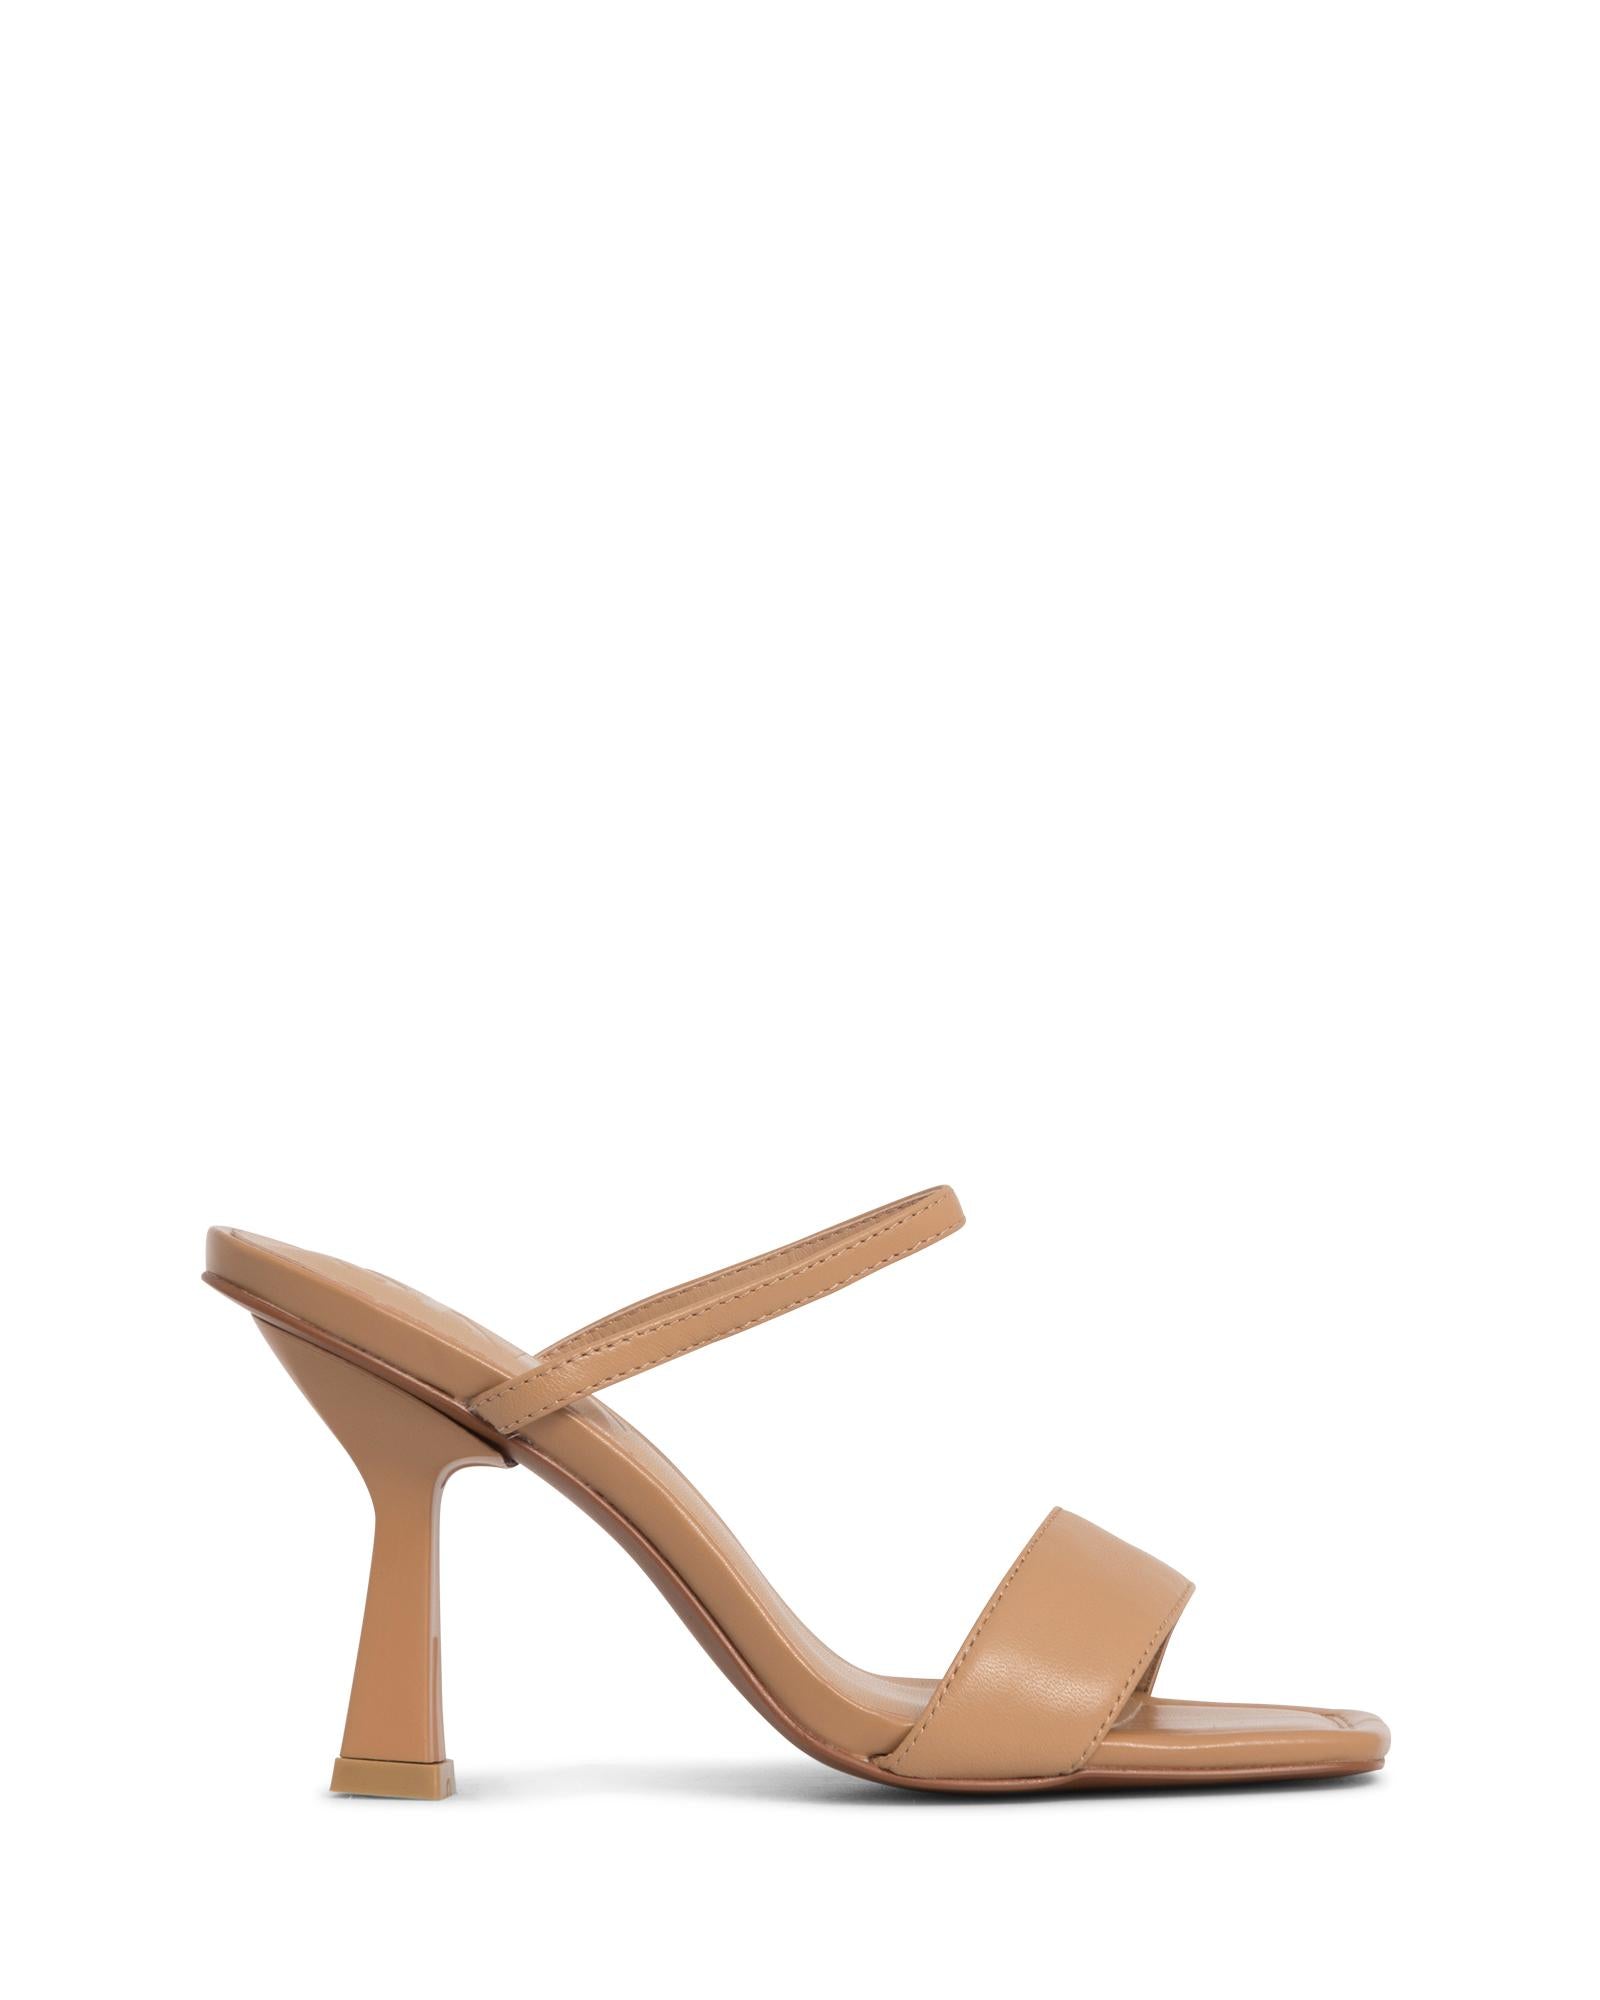 Brazil Caramel 9cm Thin Heel with Elasticed Strap and a  Square Toe